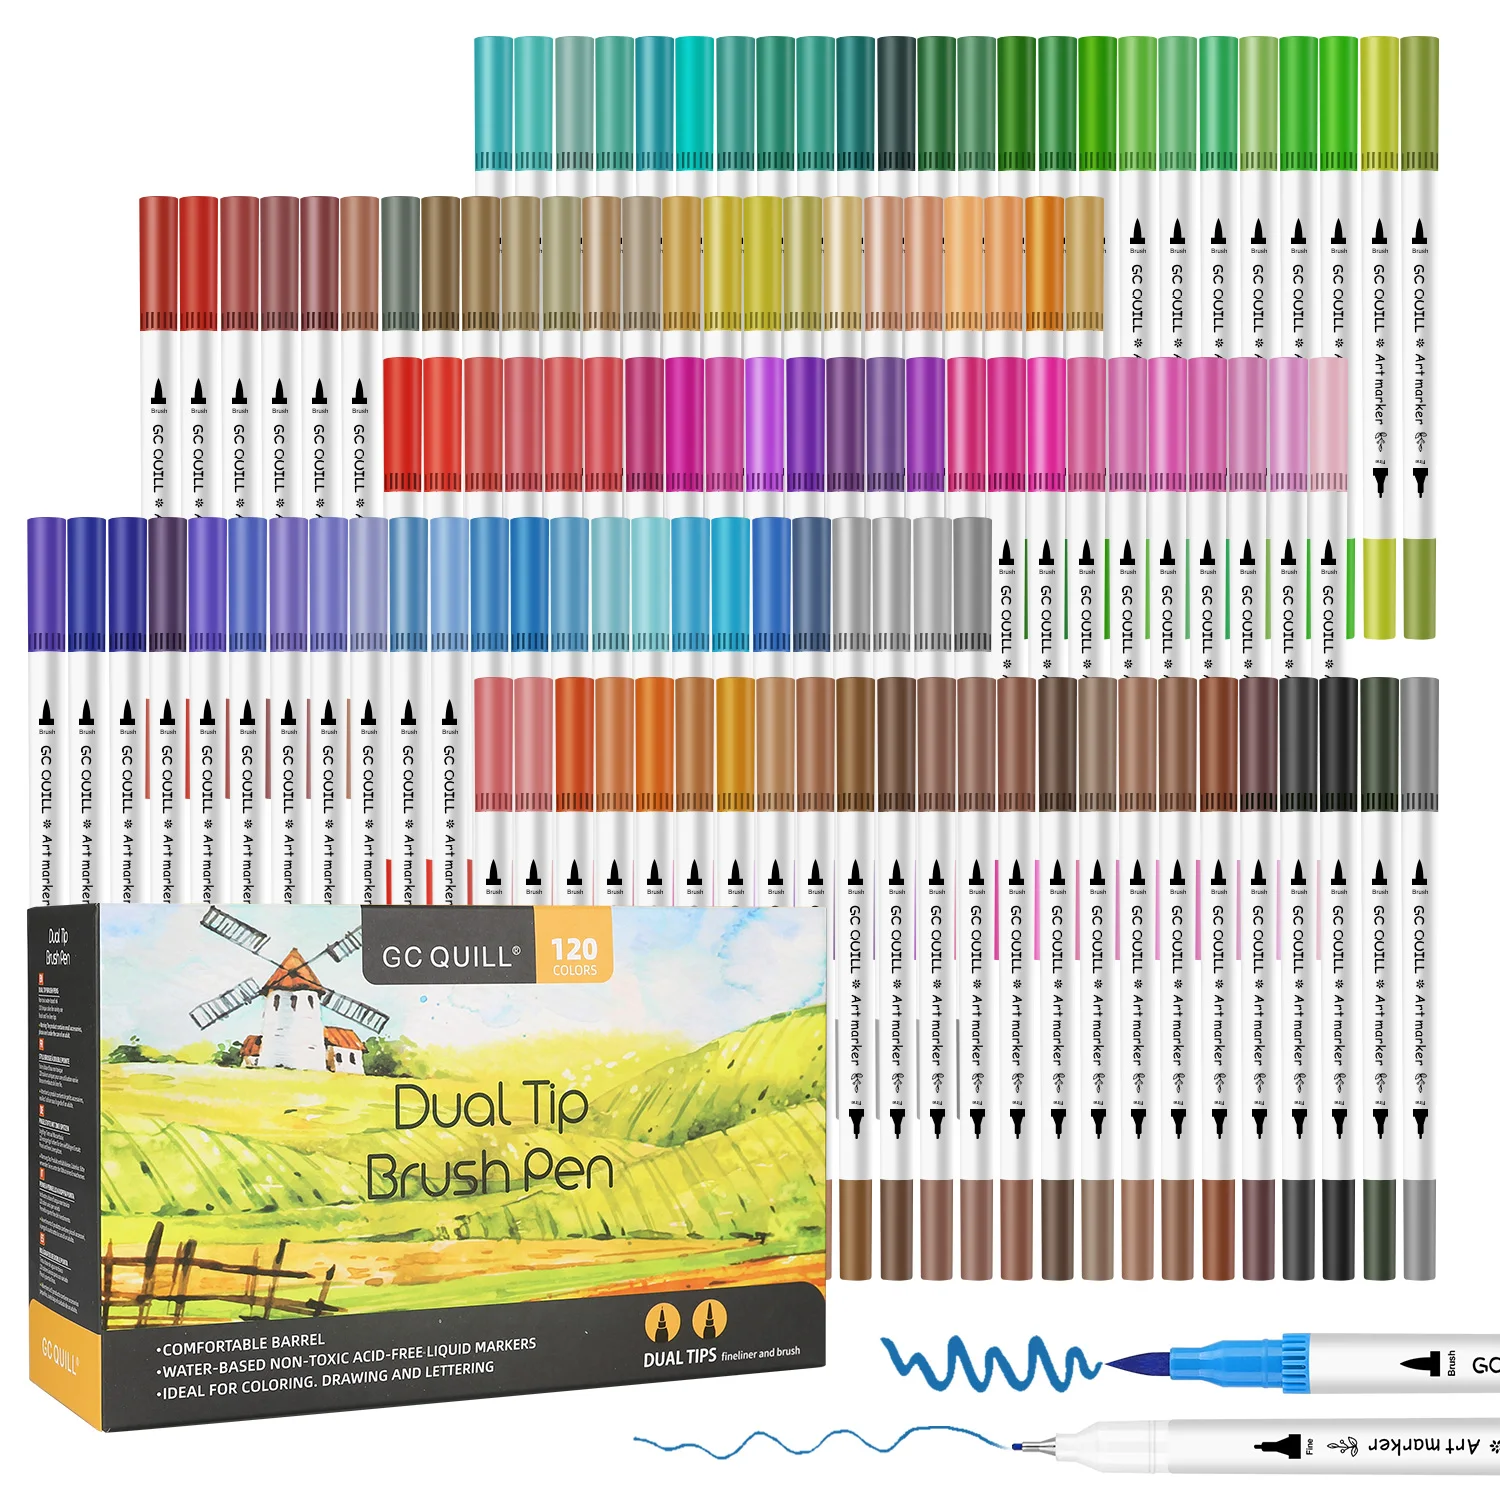 https://ae01.alicdn.com/kf/Se7de4341791c4669bdf67c202eca8927Y/GC-QUILL-120-Colours-Dual-Tip-Brush-Pens-with-Felt-Fineliner-Tips-for-Colouring-Drawing-Lettering.jpg